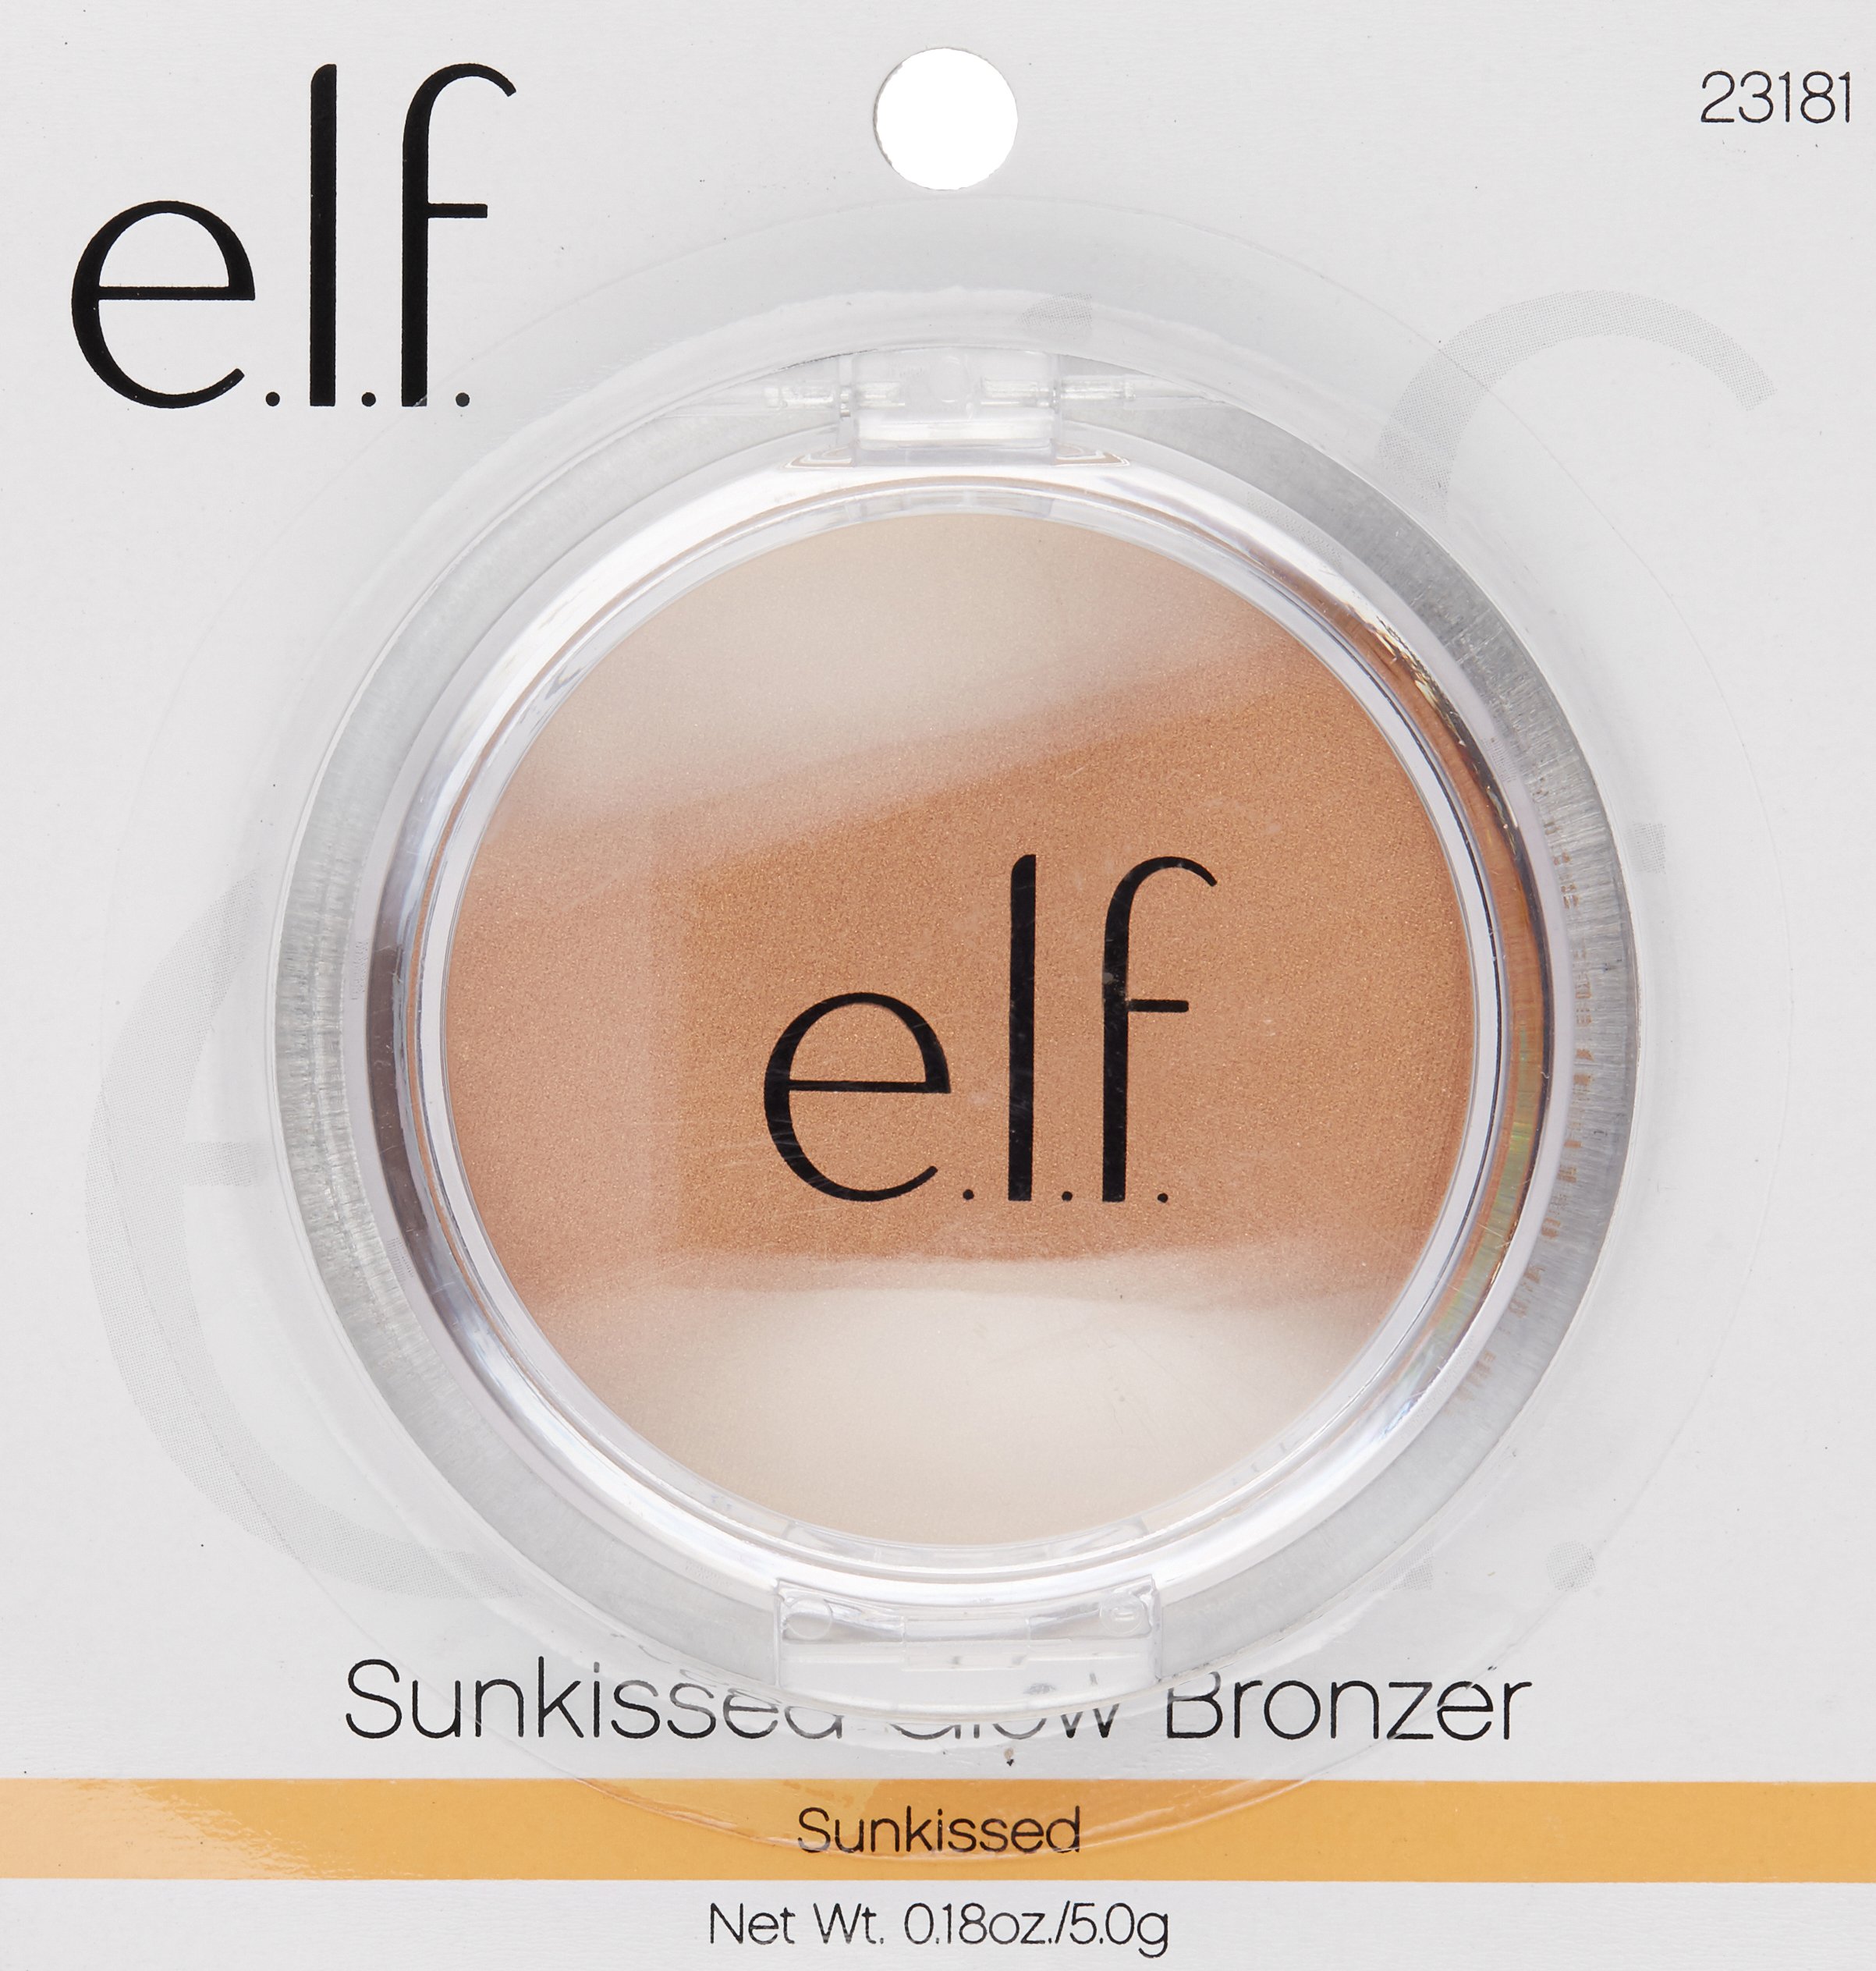 e.l.f. Cosmetics Bronzer Palette, Four Matte and Shimmer Powder Bronzers Create a Sun-Kissed Glow, Deep Bronzer